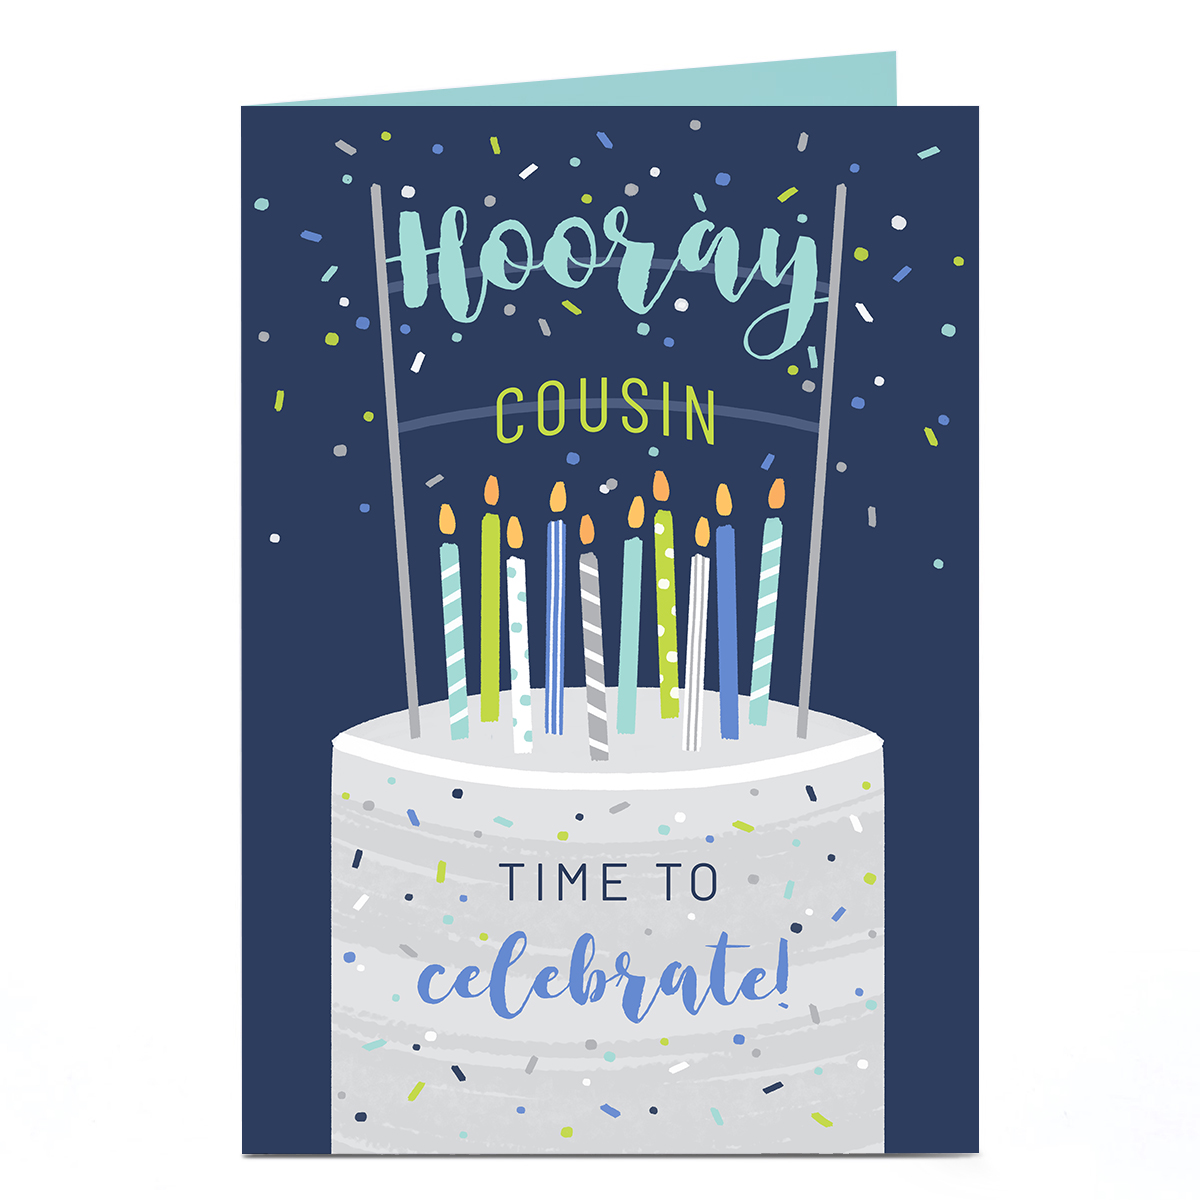 Personalised Birthday Card - Time To Celebrate Cousin